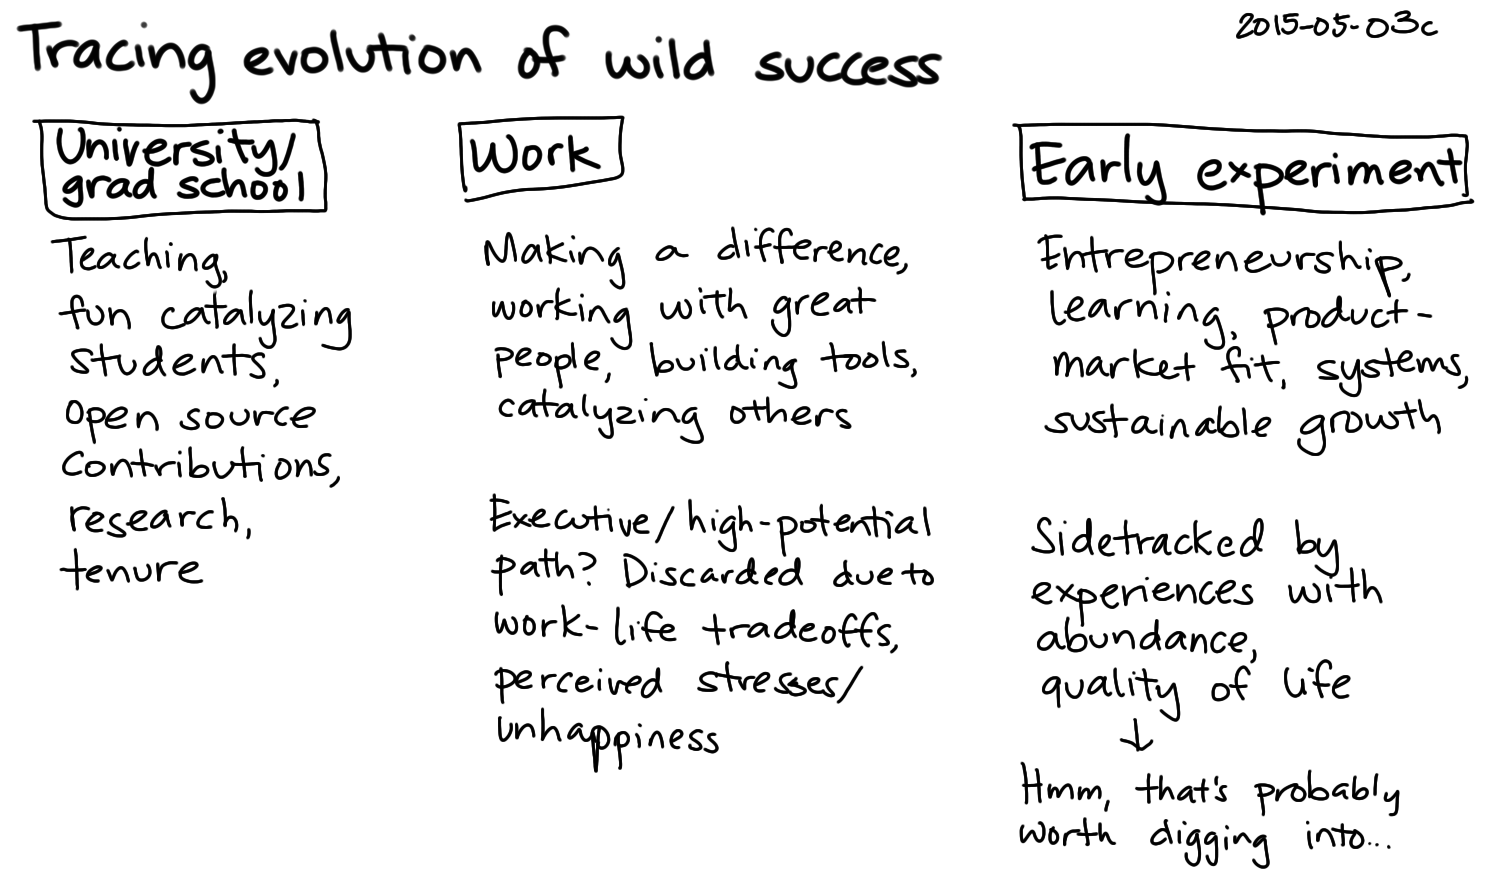 2015-05-03c Tracing evolution of wild success -- index card #experiment #success.png